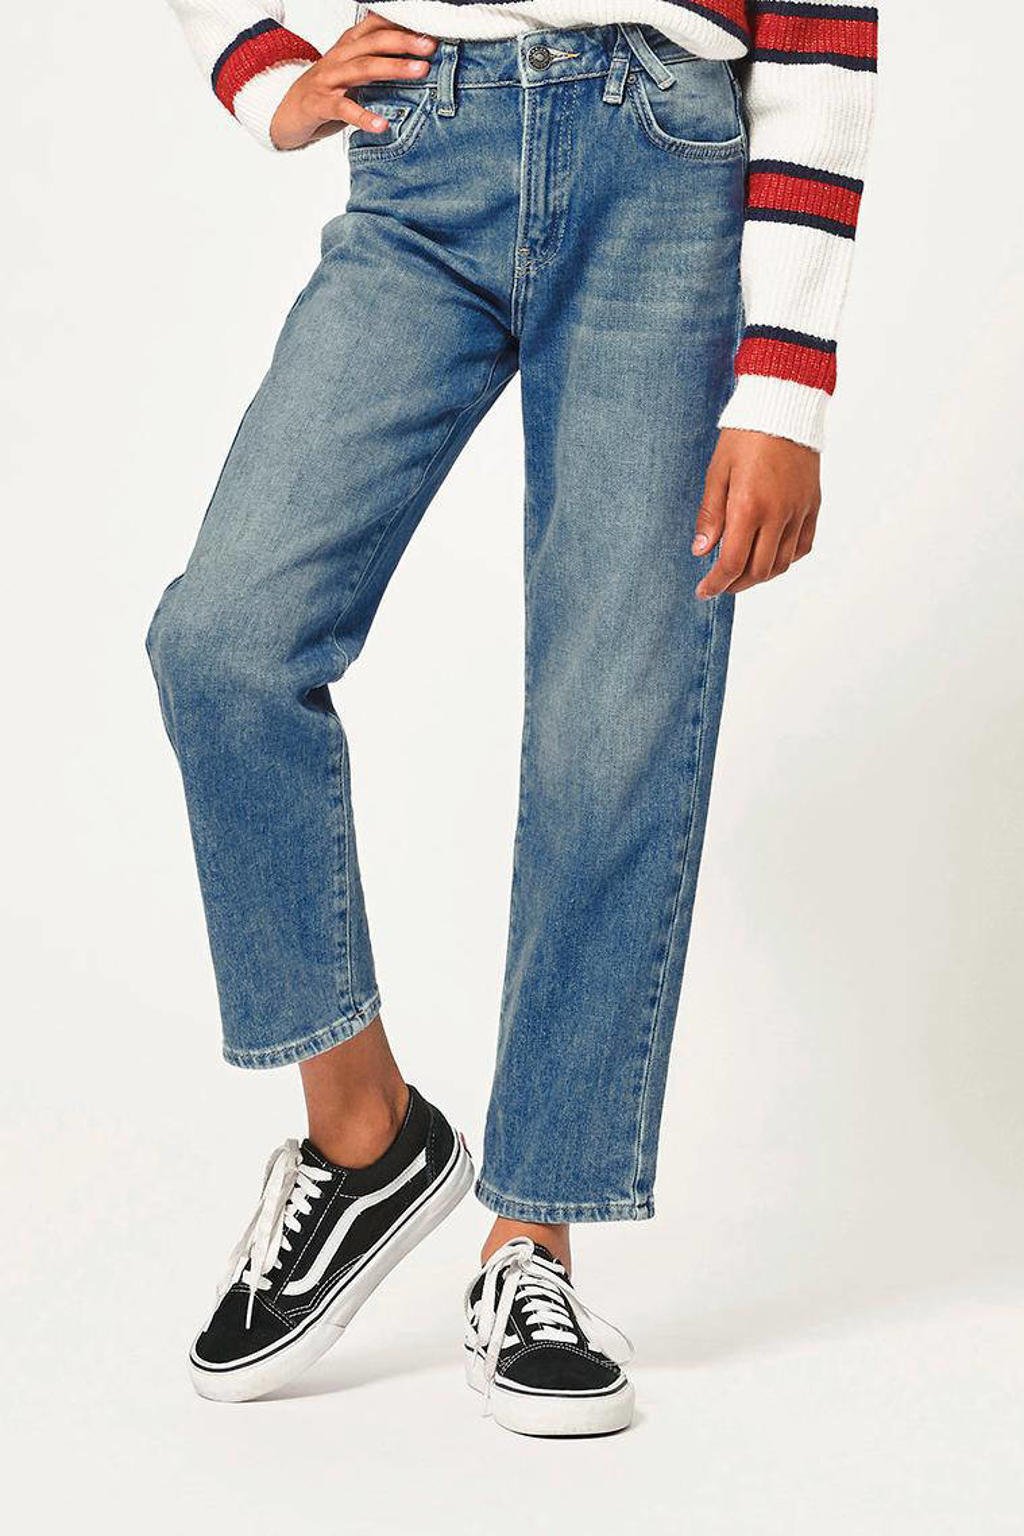 America Today Junior cropped loose fit jeans Kathy stonewashed